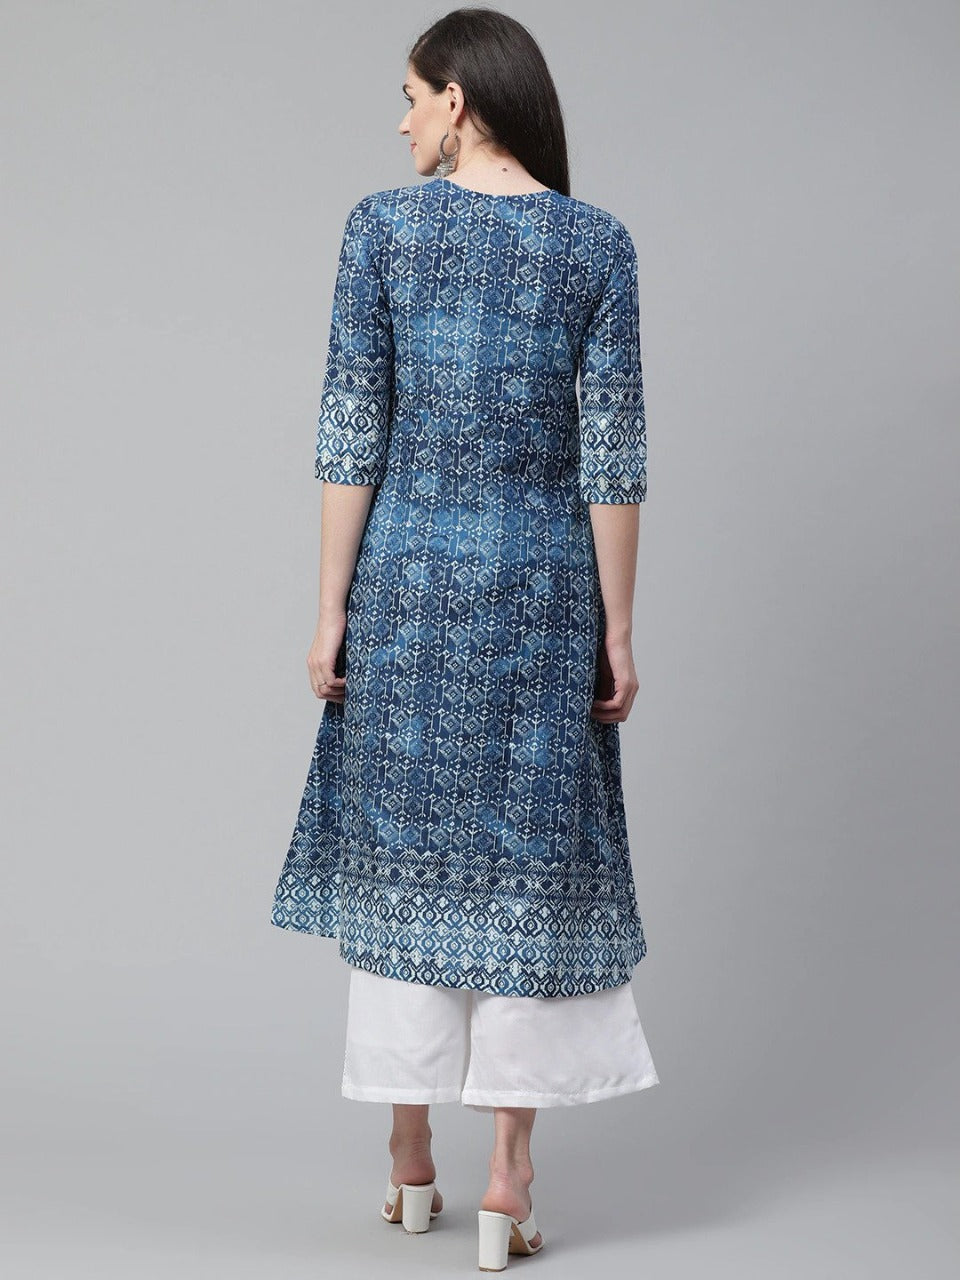 Women's Blue Cotton Printed Party Wear/Casual Wear Only Kurti - Vamika